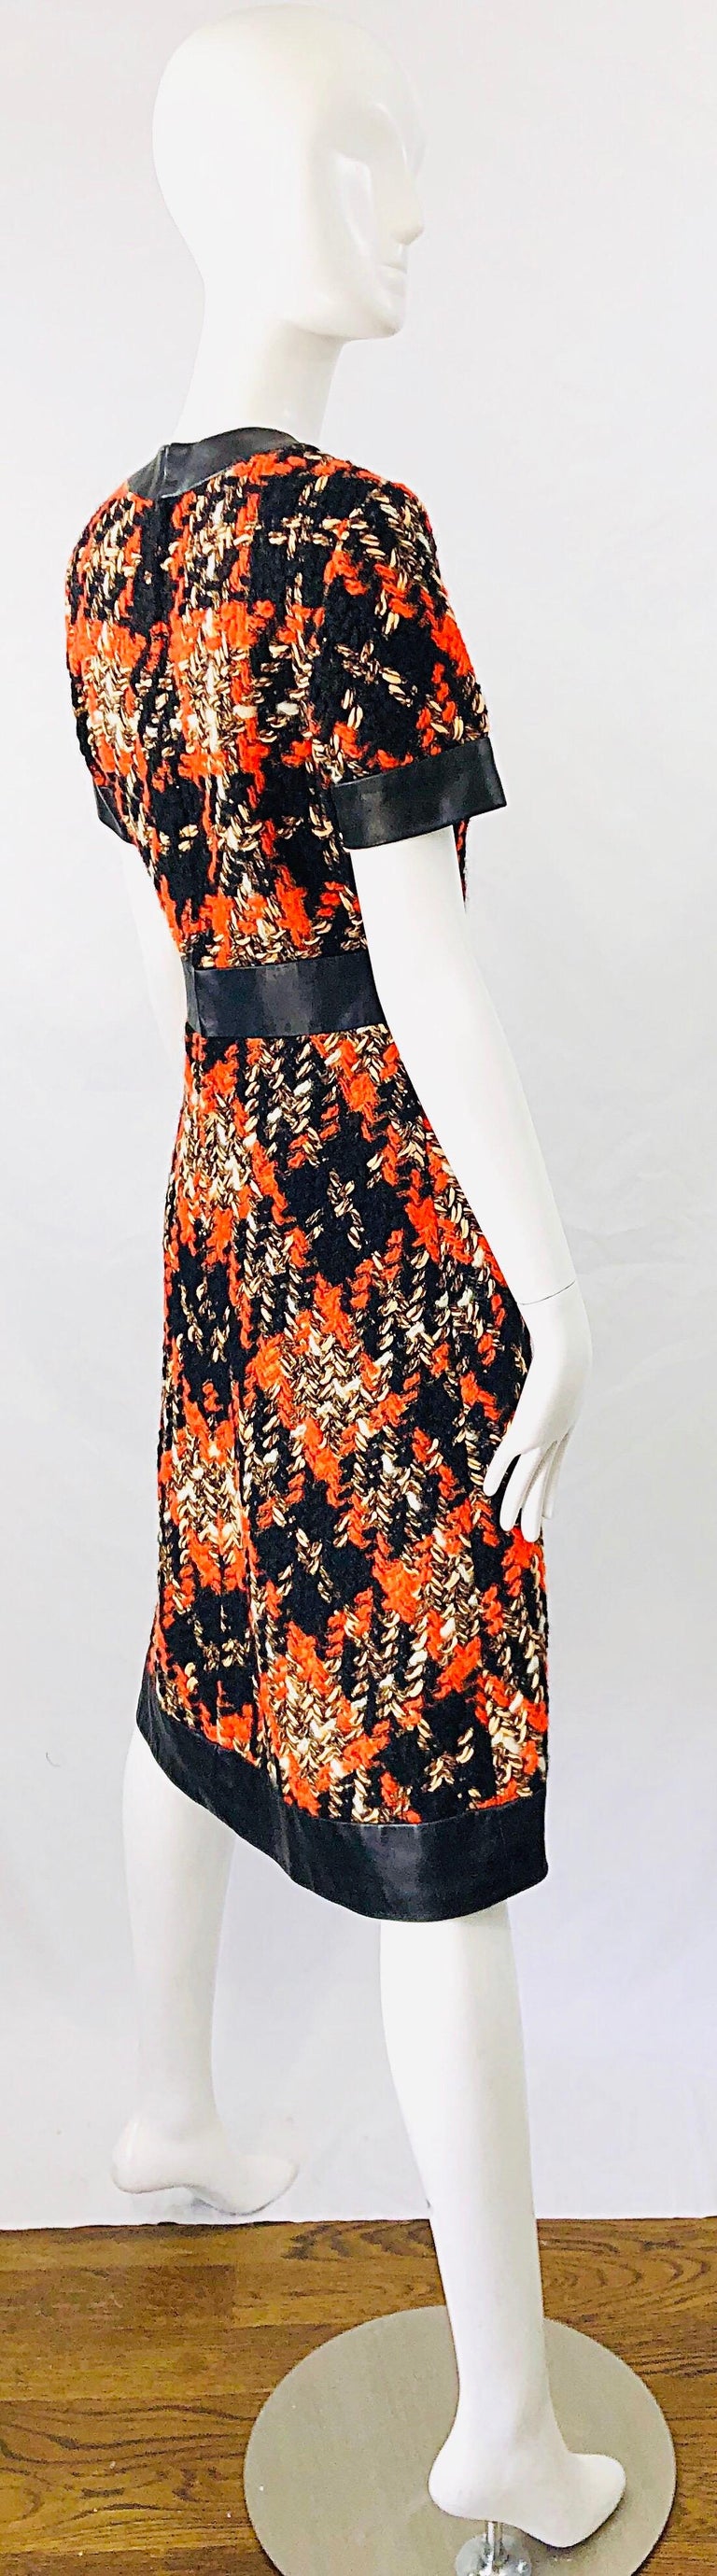 Louis Feraud 1960s Vintage Printed Silk Belted Dress Size 40 / 4 Small Blues